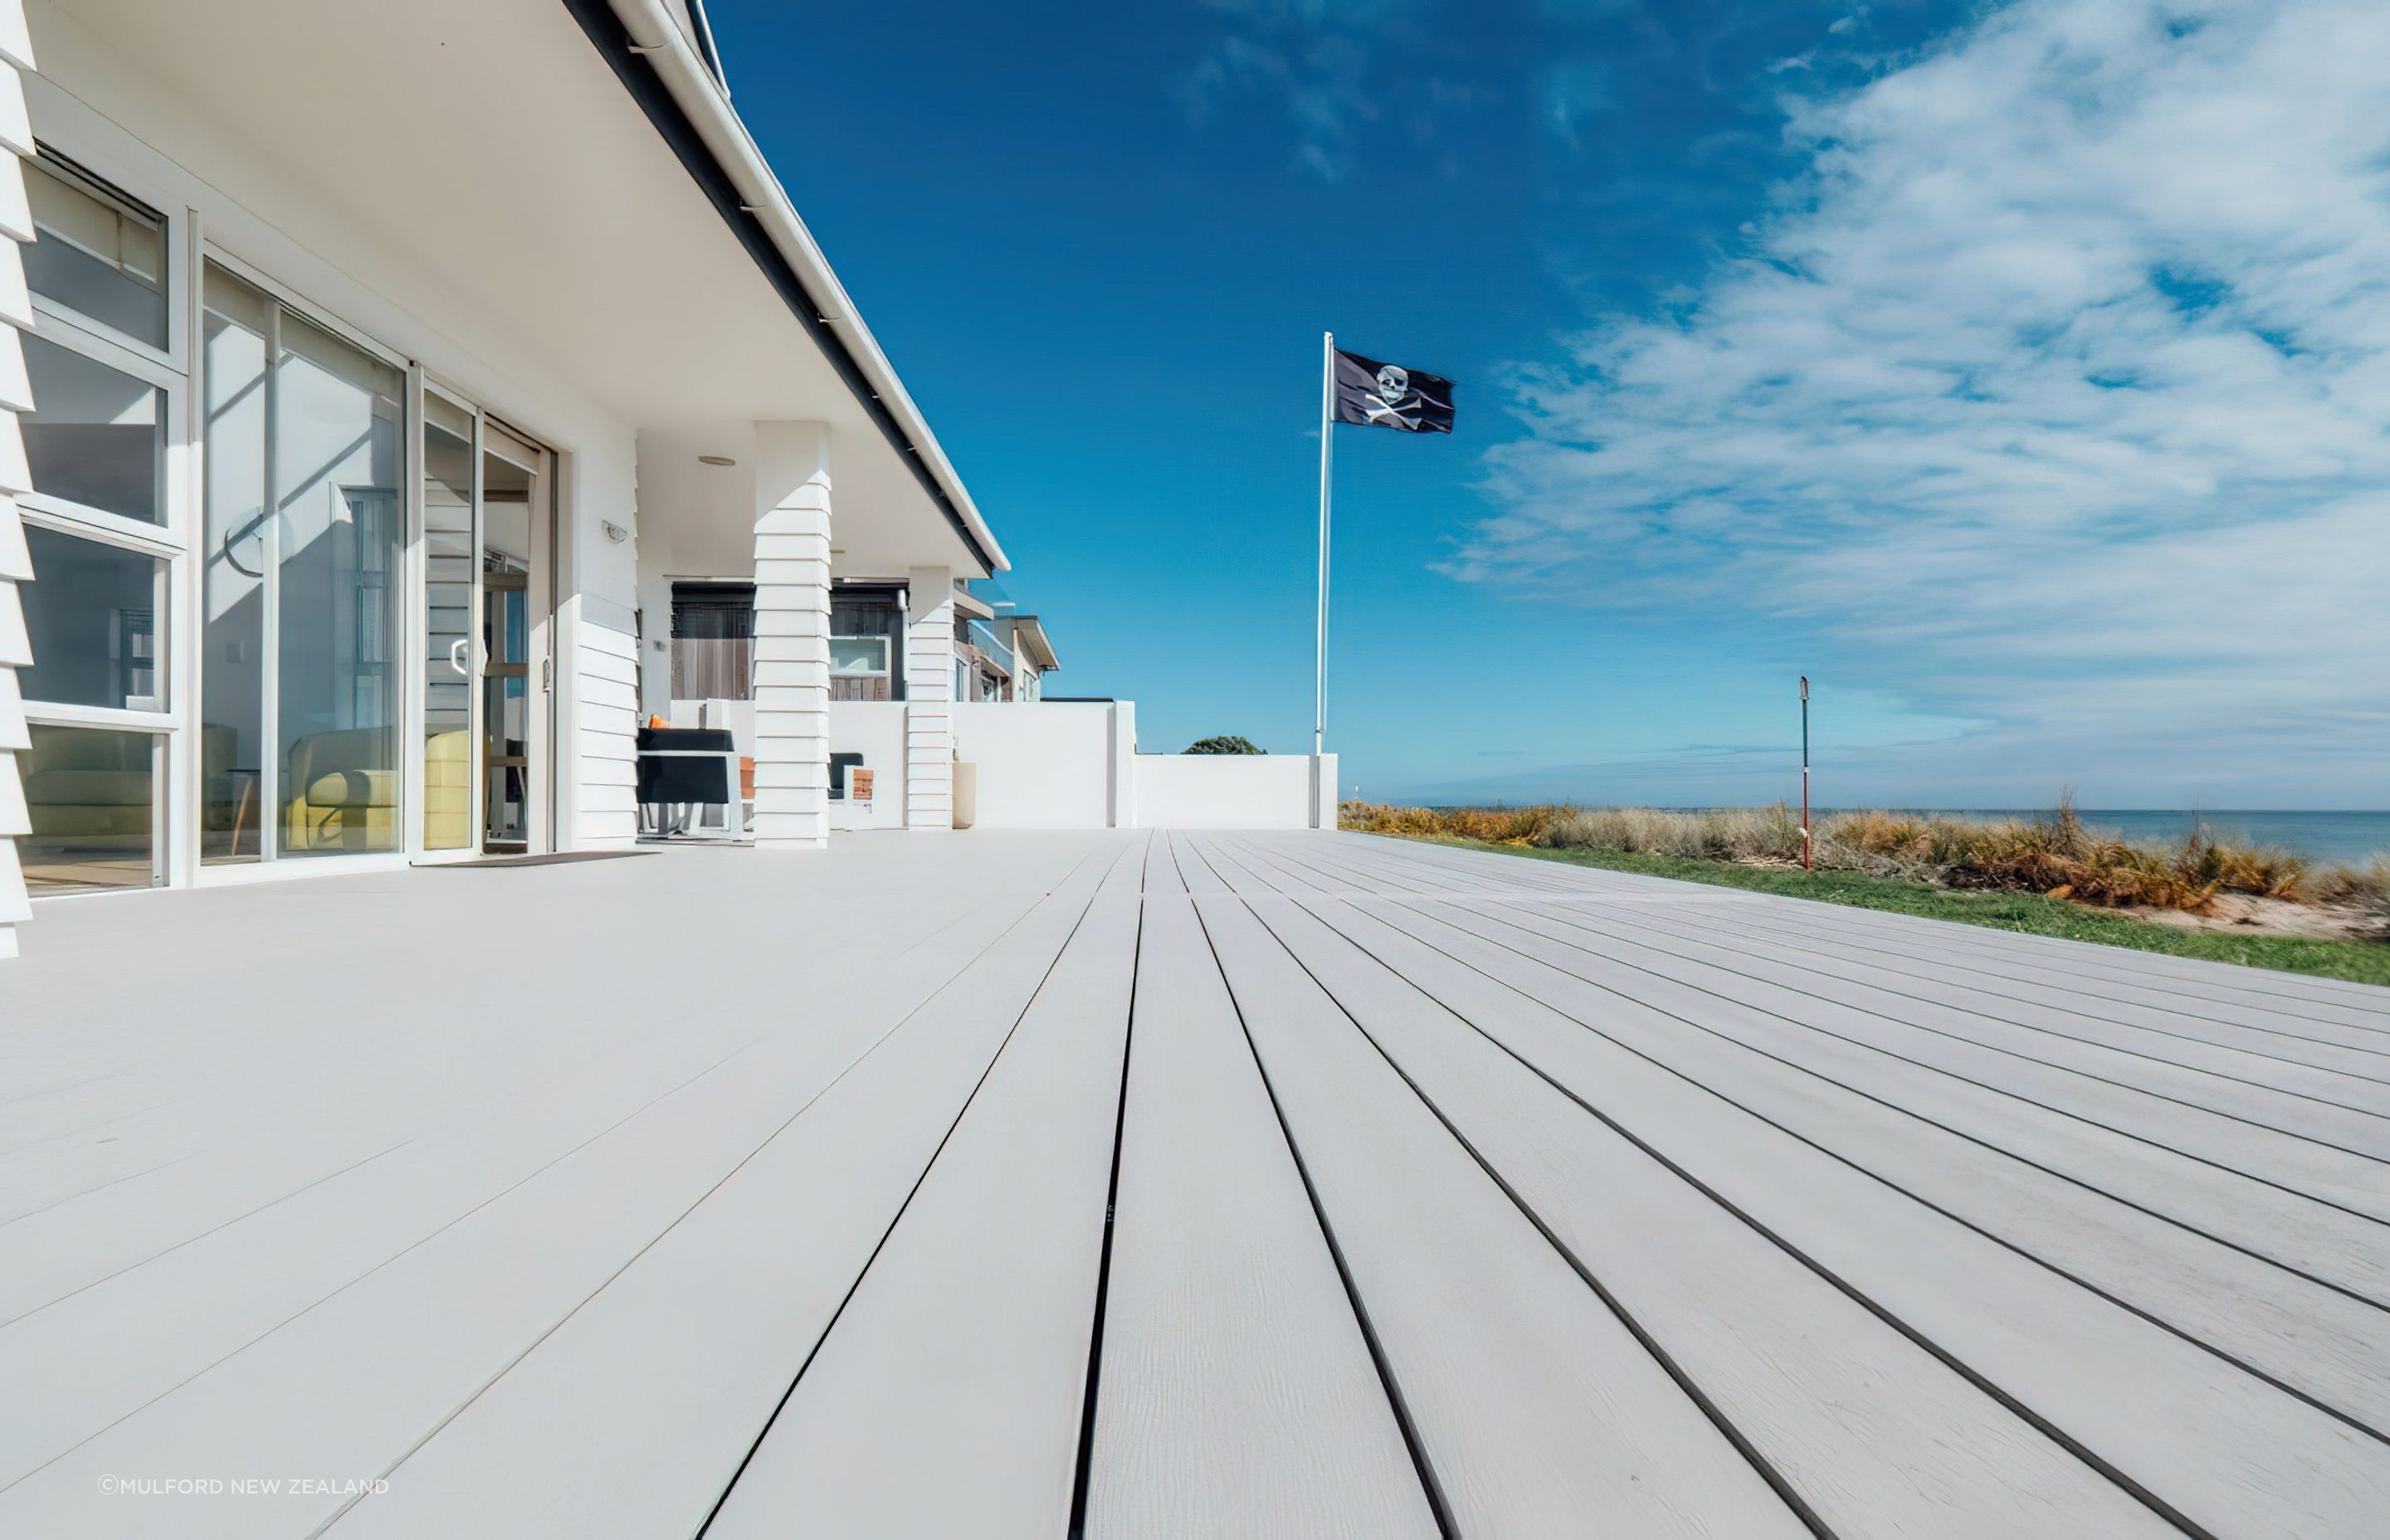 This composite decking solution from Futurewood Decking provided the homeowners with a stylish and low-maintenance deck for this sunny coastal location.